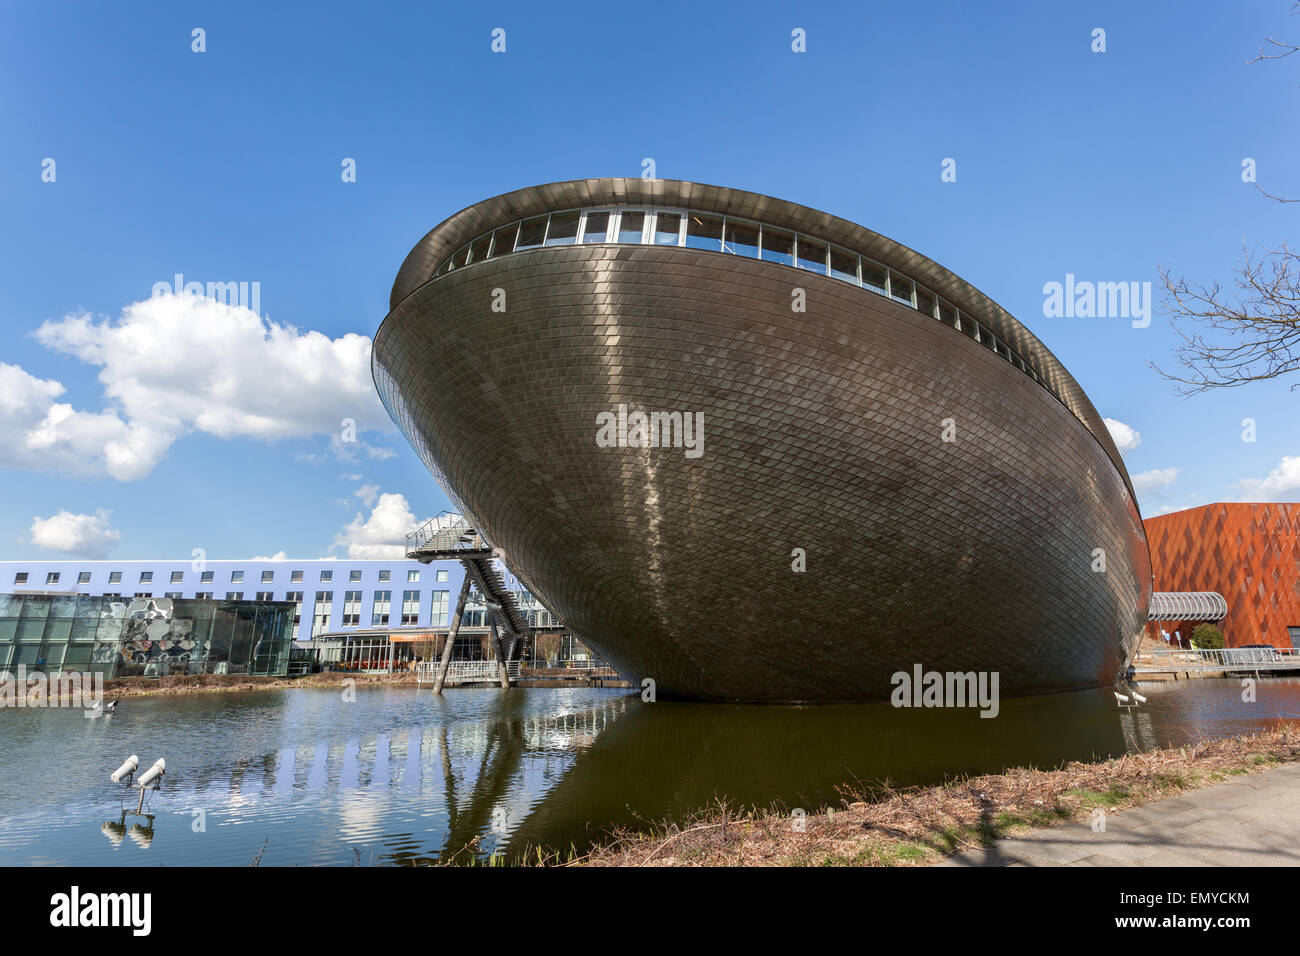 The Universum Science Center building from the University of Bremen, Germany Stock Photo